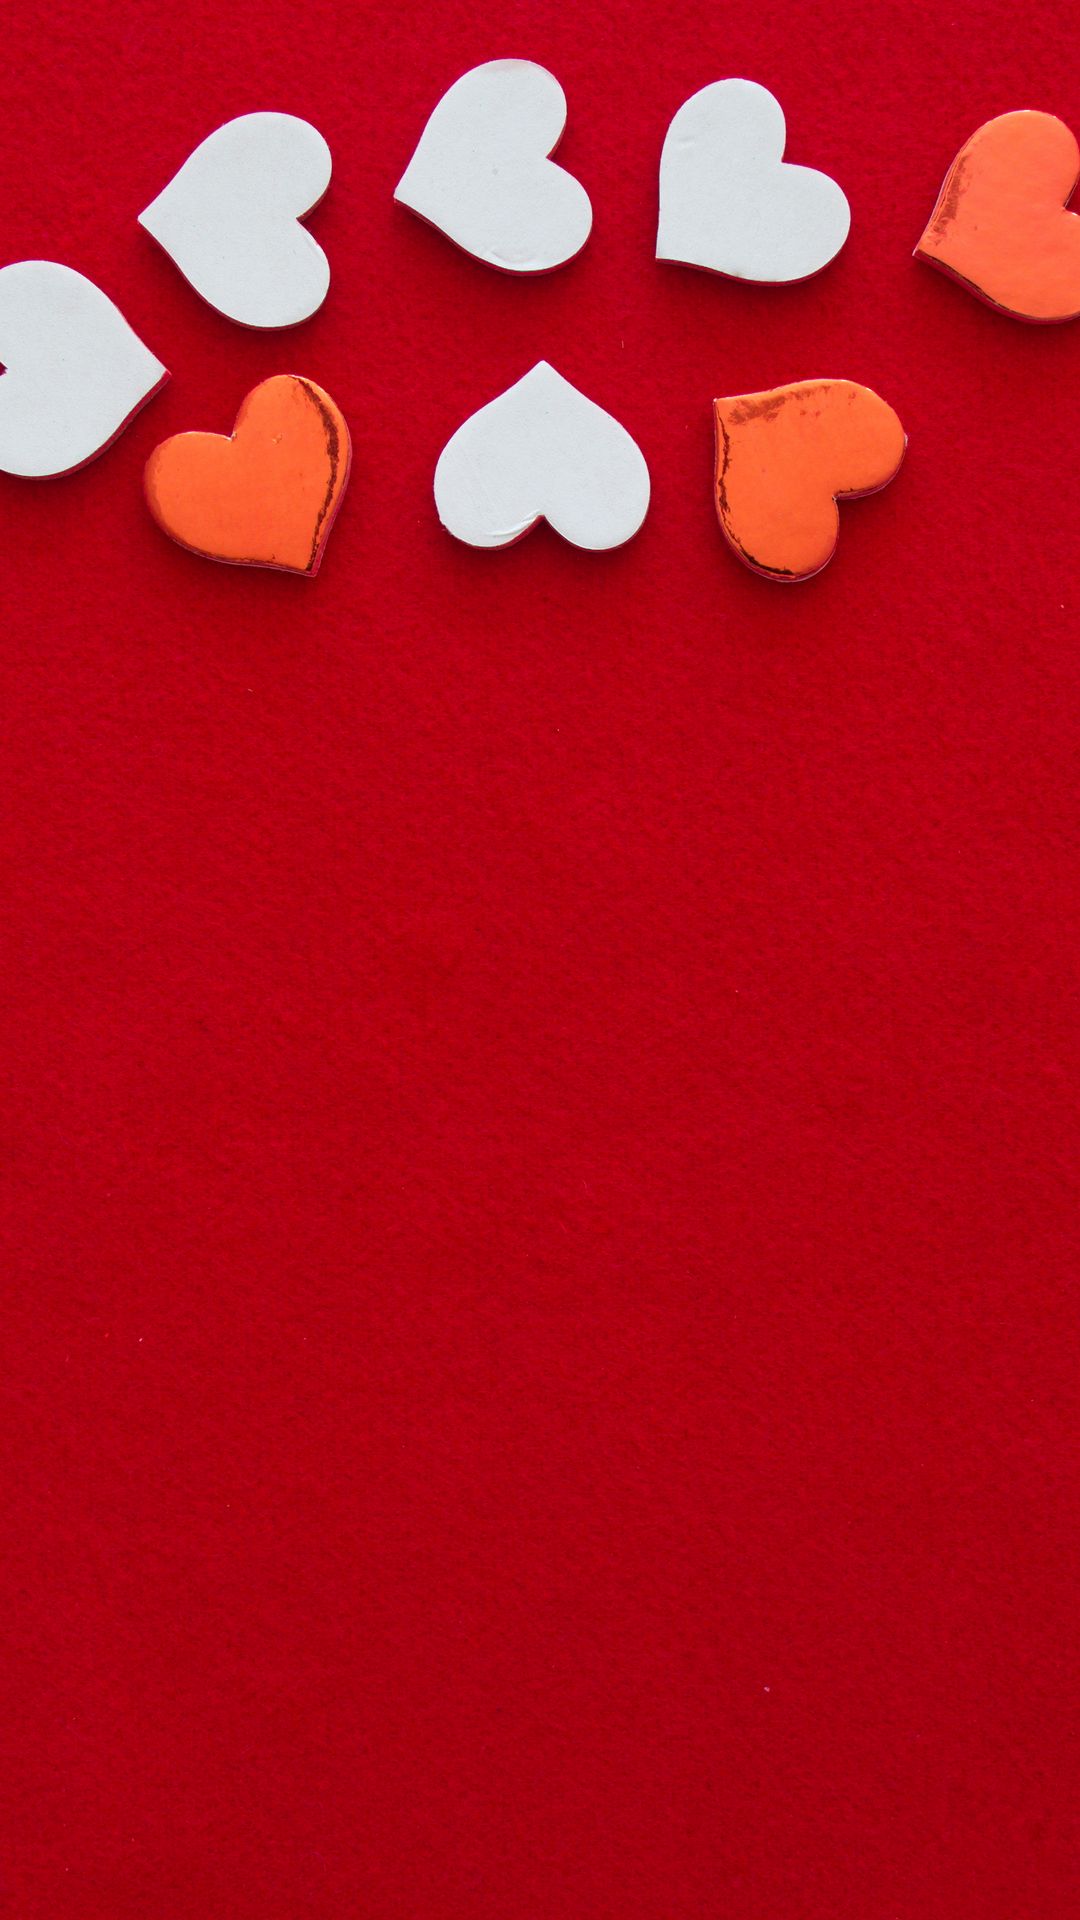 1080x1920 Wallpaper hearts, love, background, white, red